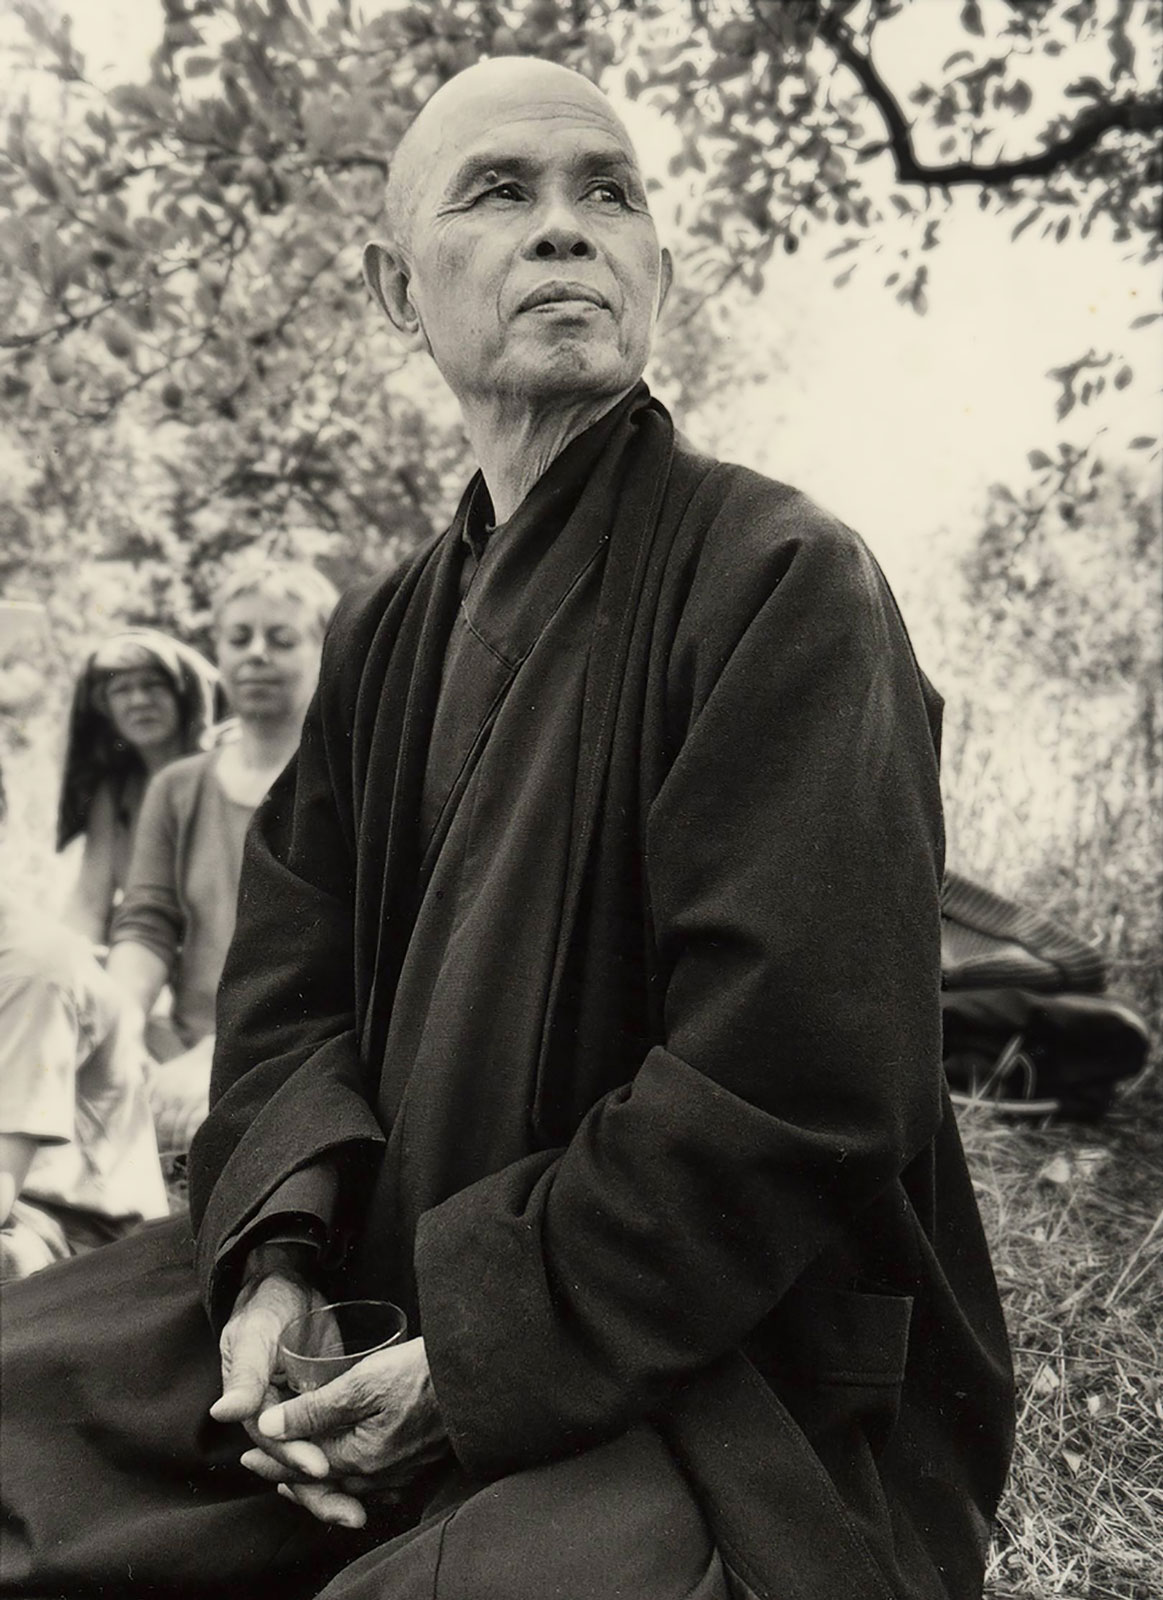 Thich Nhat Hanh at the Plum Vilage monastery in southern France